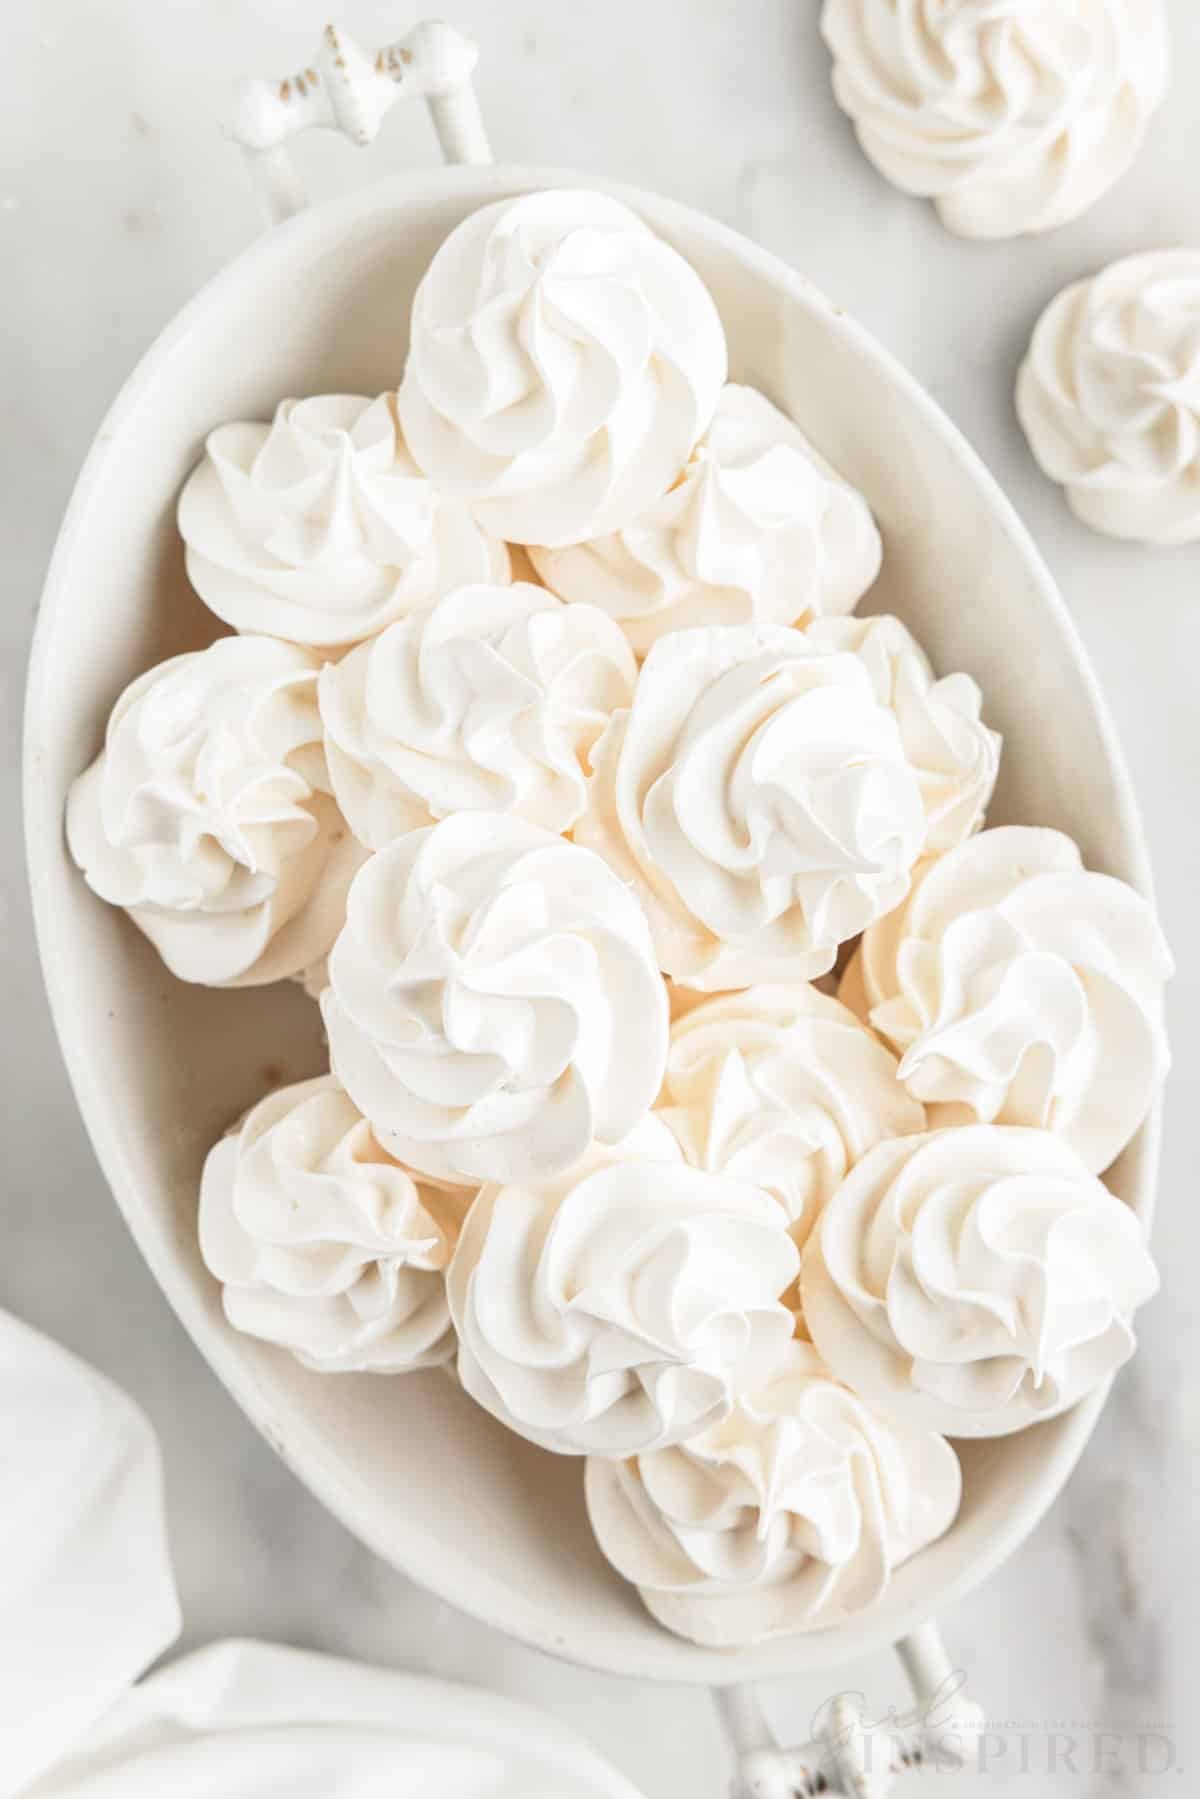 oval white serving bowl with meringue cookies stacked in it